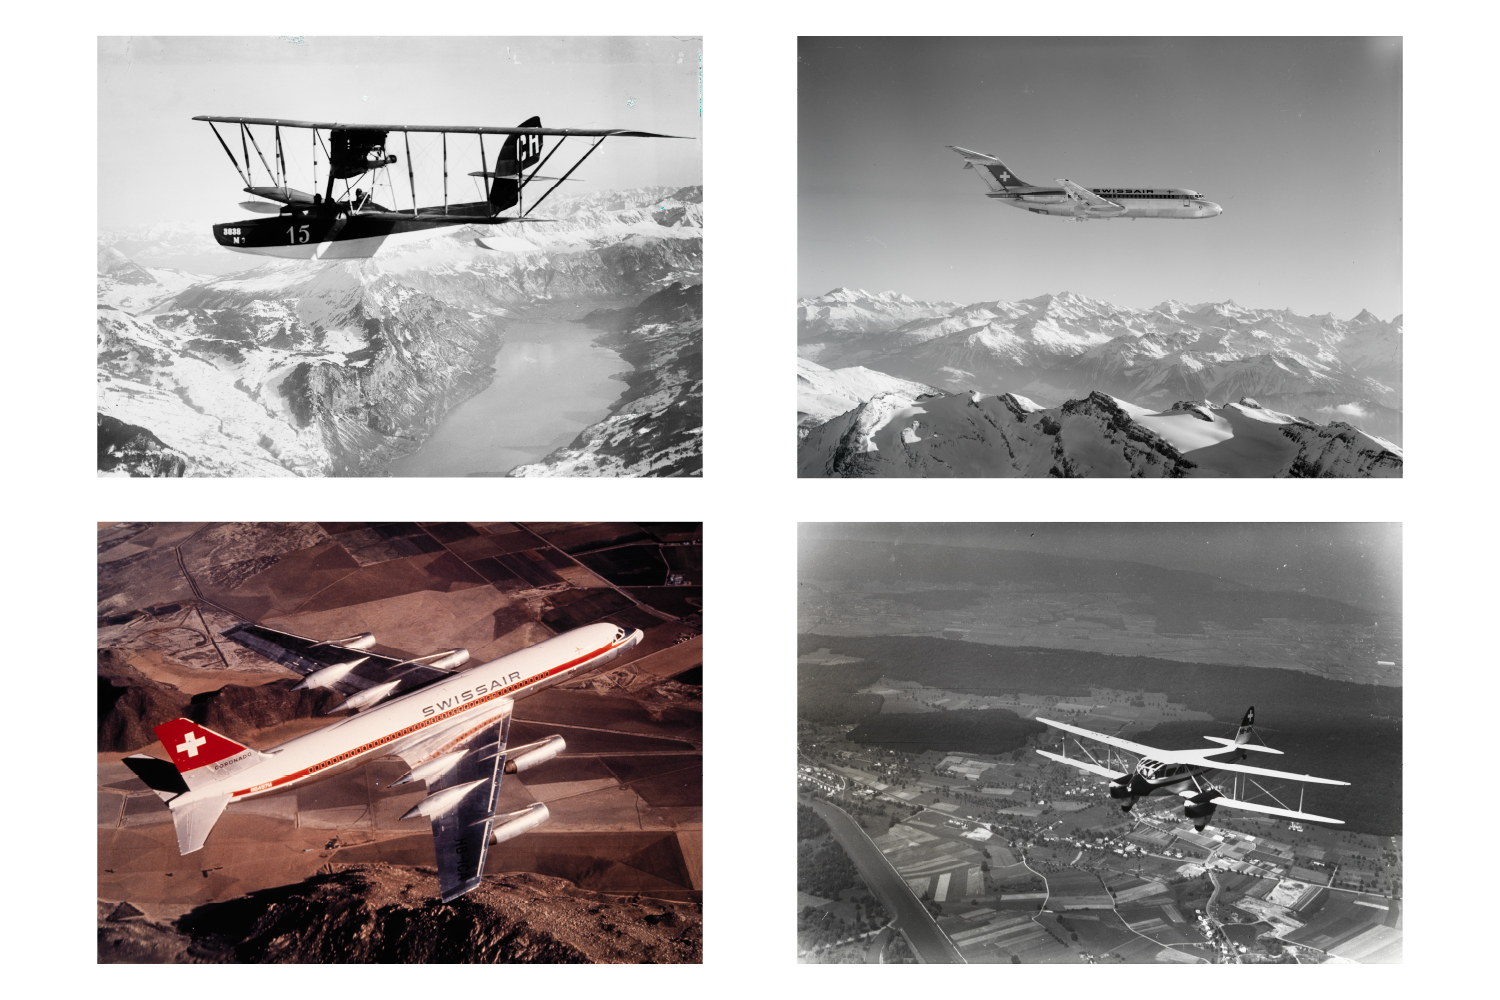 Clockwise from top left:
                              
                              A Macchi M.3 seaplane from Swissair’s forerunner Ad Astra Aero AG over Walensee,  ca. 1920. 
                              
                              A DC-9-15 over the Alps, 1966.
                               
                              A De Havilland DH-89 Dragon Rapide over Geroldswil, flown by Swissair 1948–1954.
                               
                              A Convair CV-990 Coronado in flight, ca. 1960–1962.